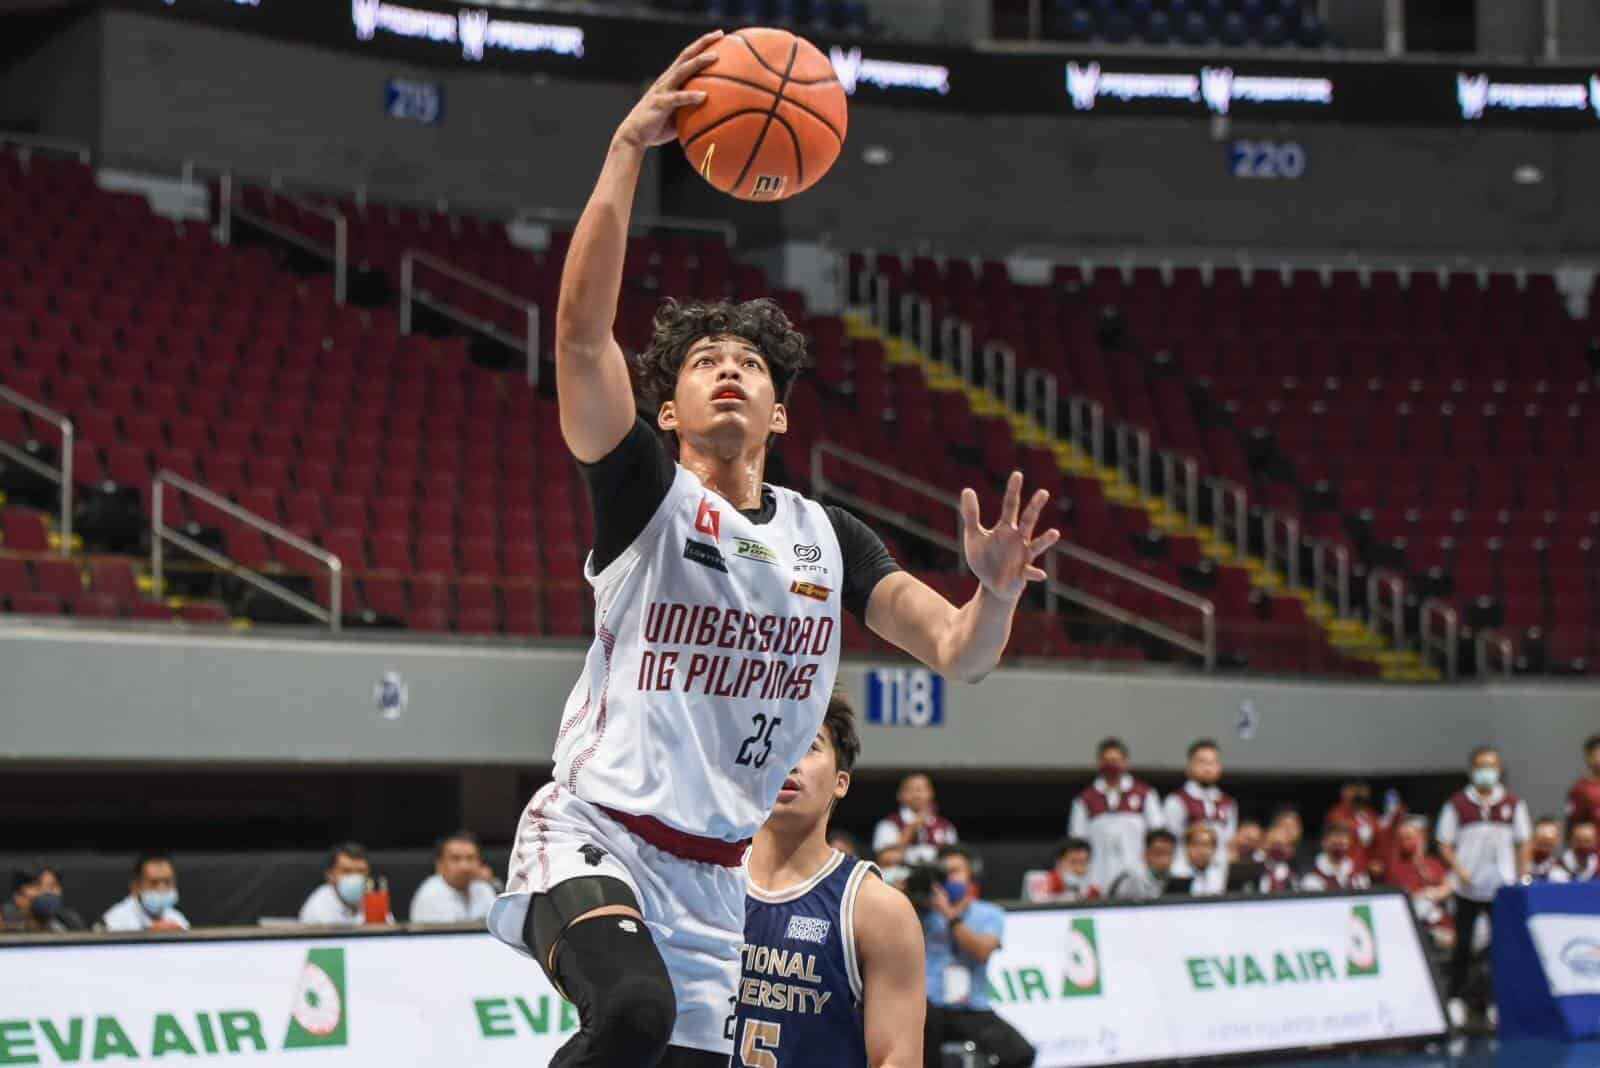 A basketball player from the UP Fighting Maroons is about to shoot the ball in a game against NU.